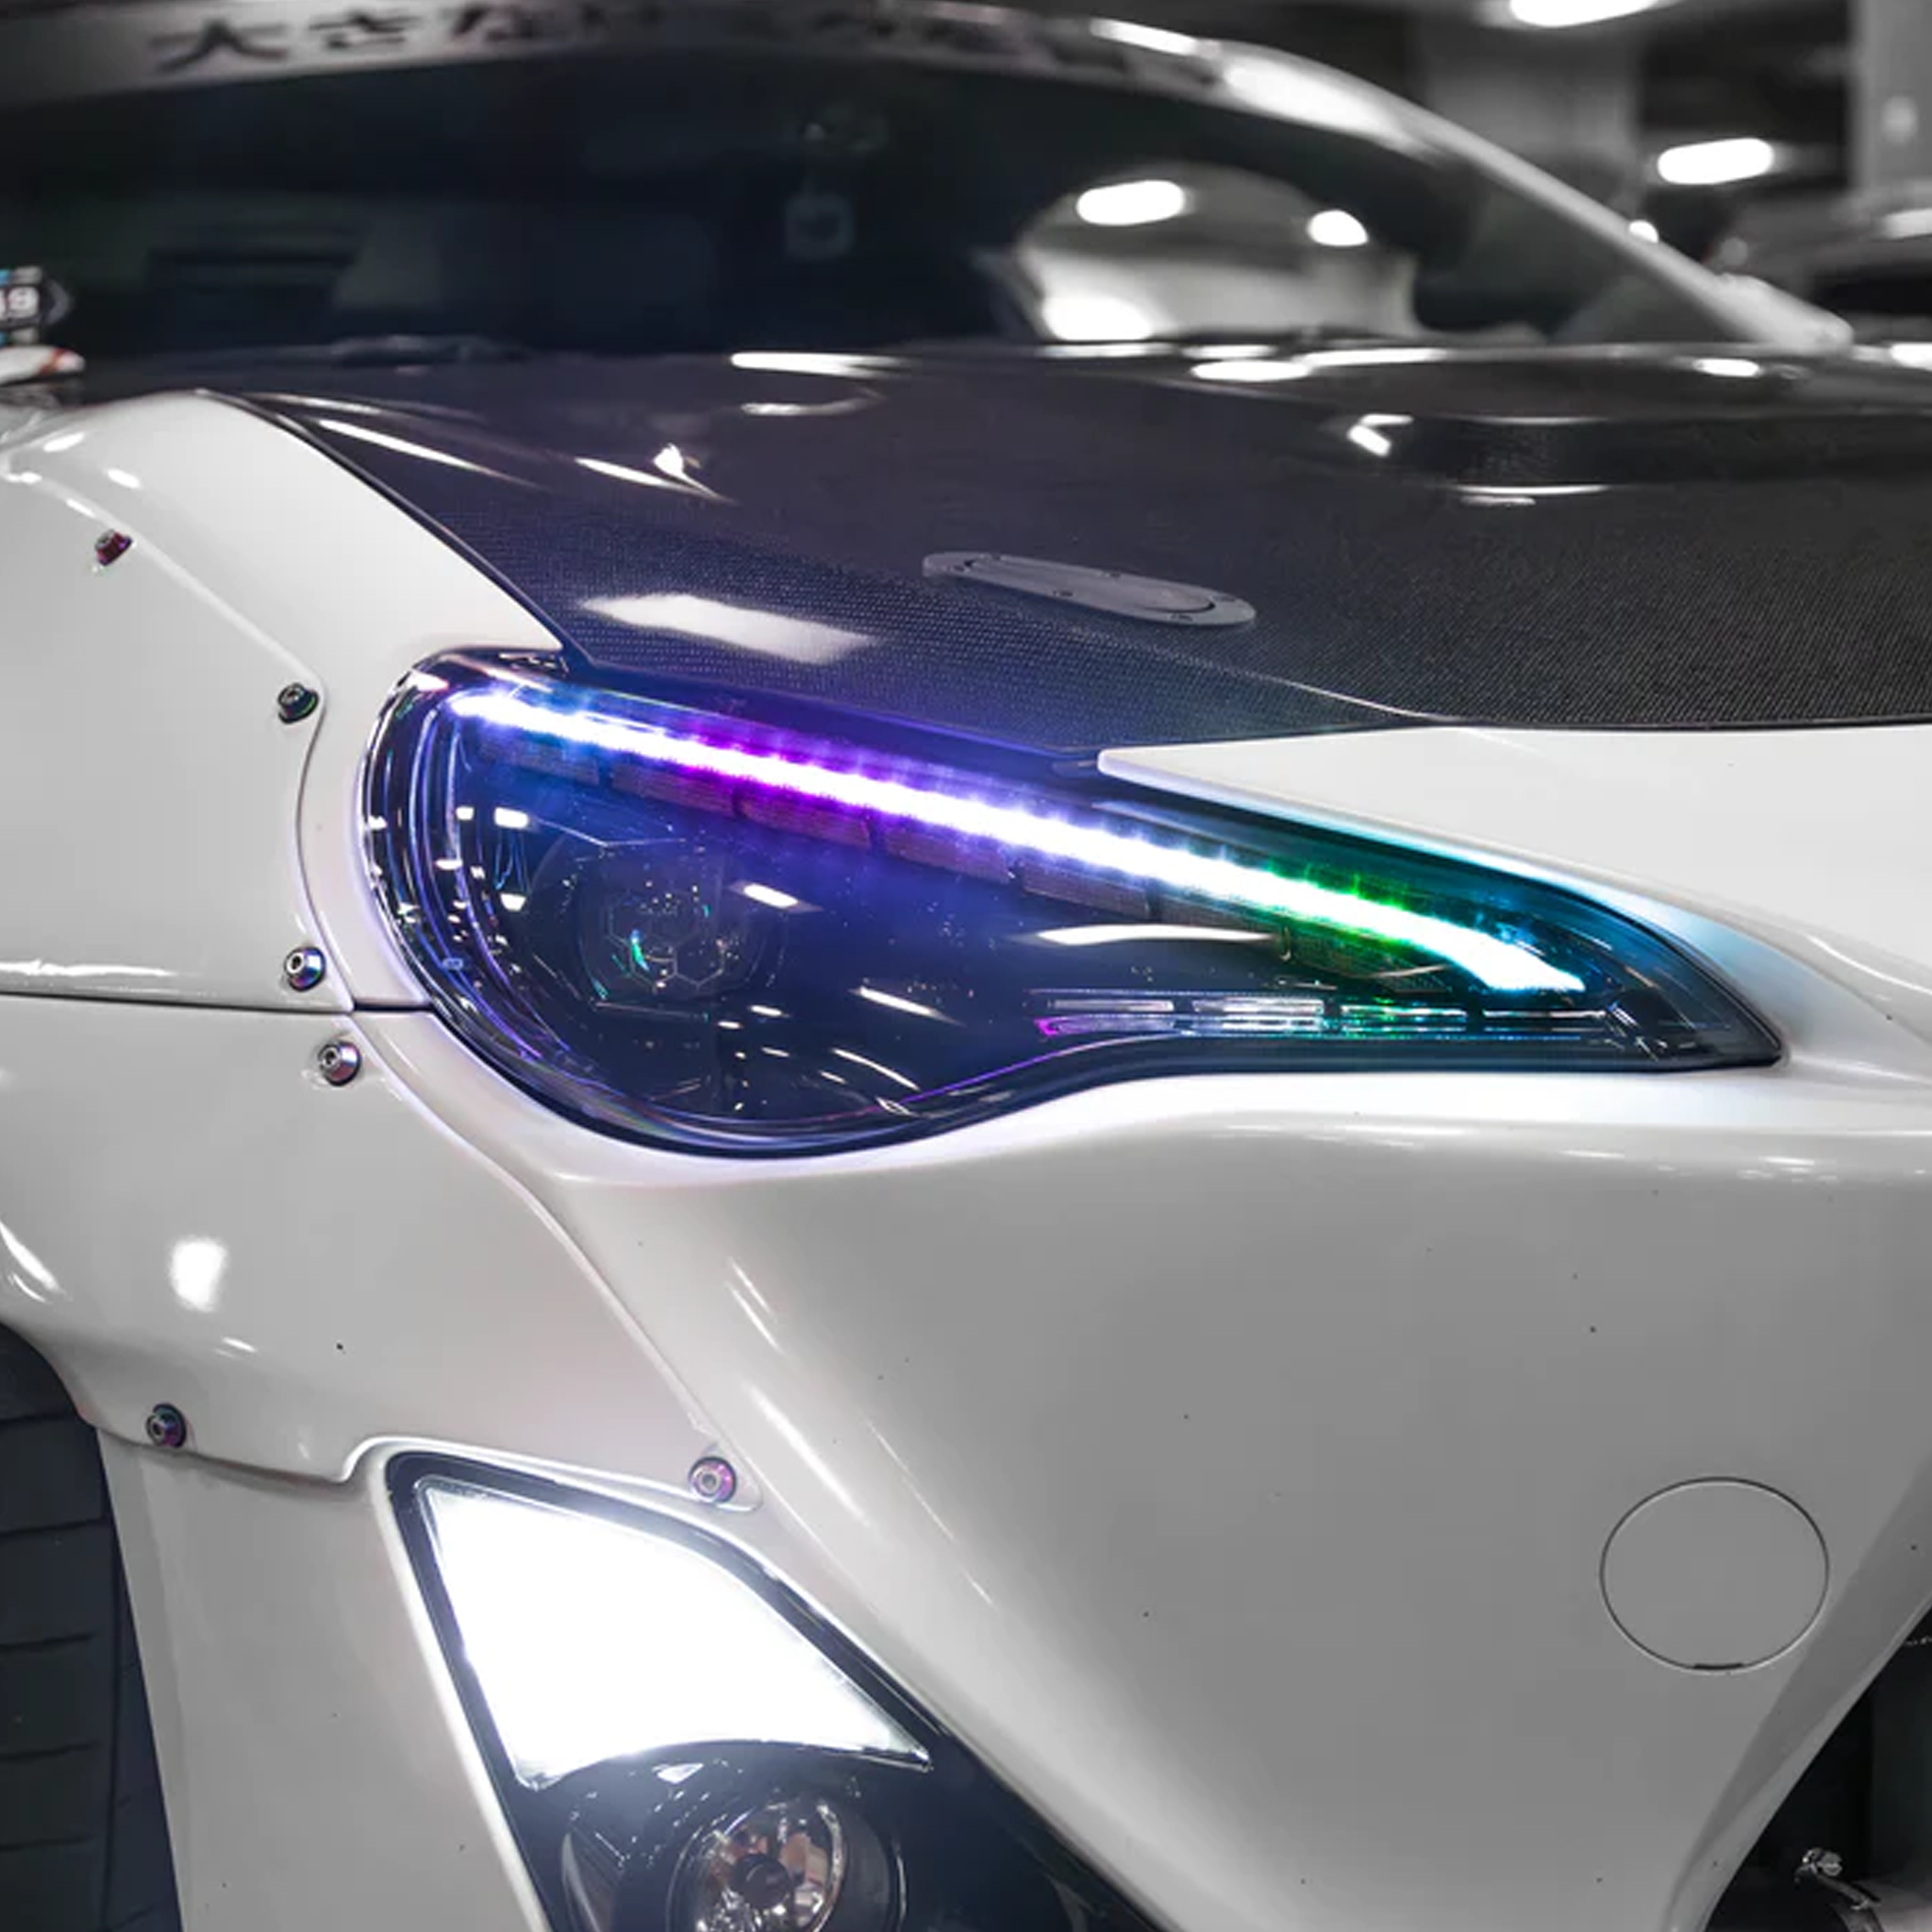 FR-S / BRZ / GT86: Multicolor Built with Honeycomb Demon Eyes Headlights